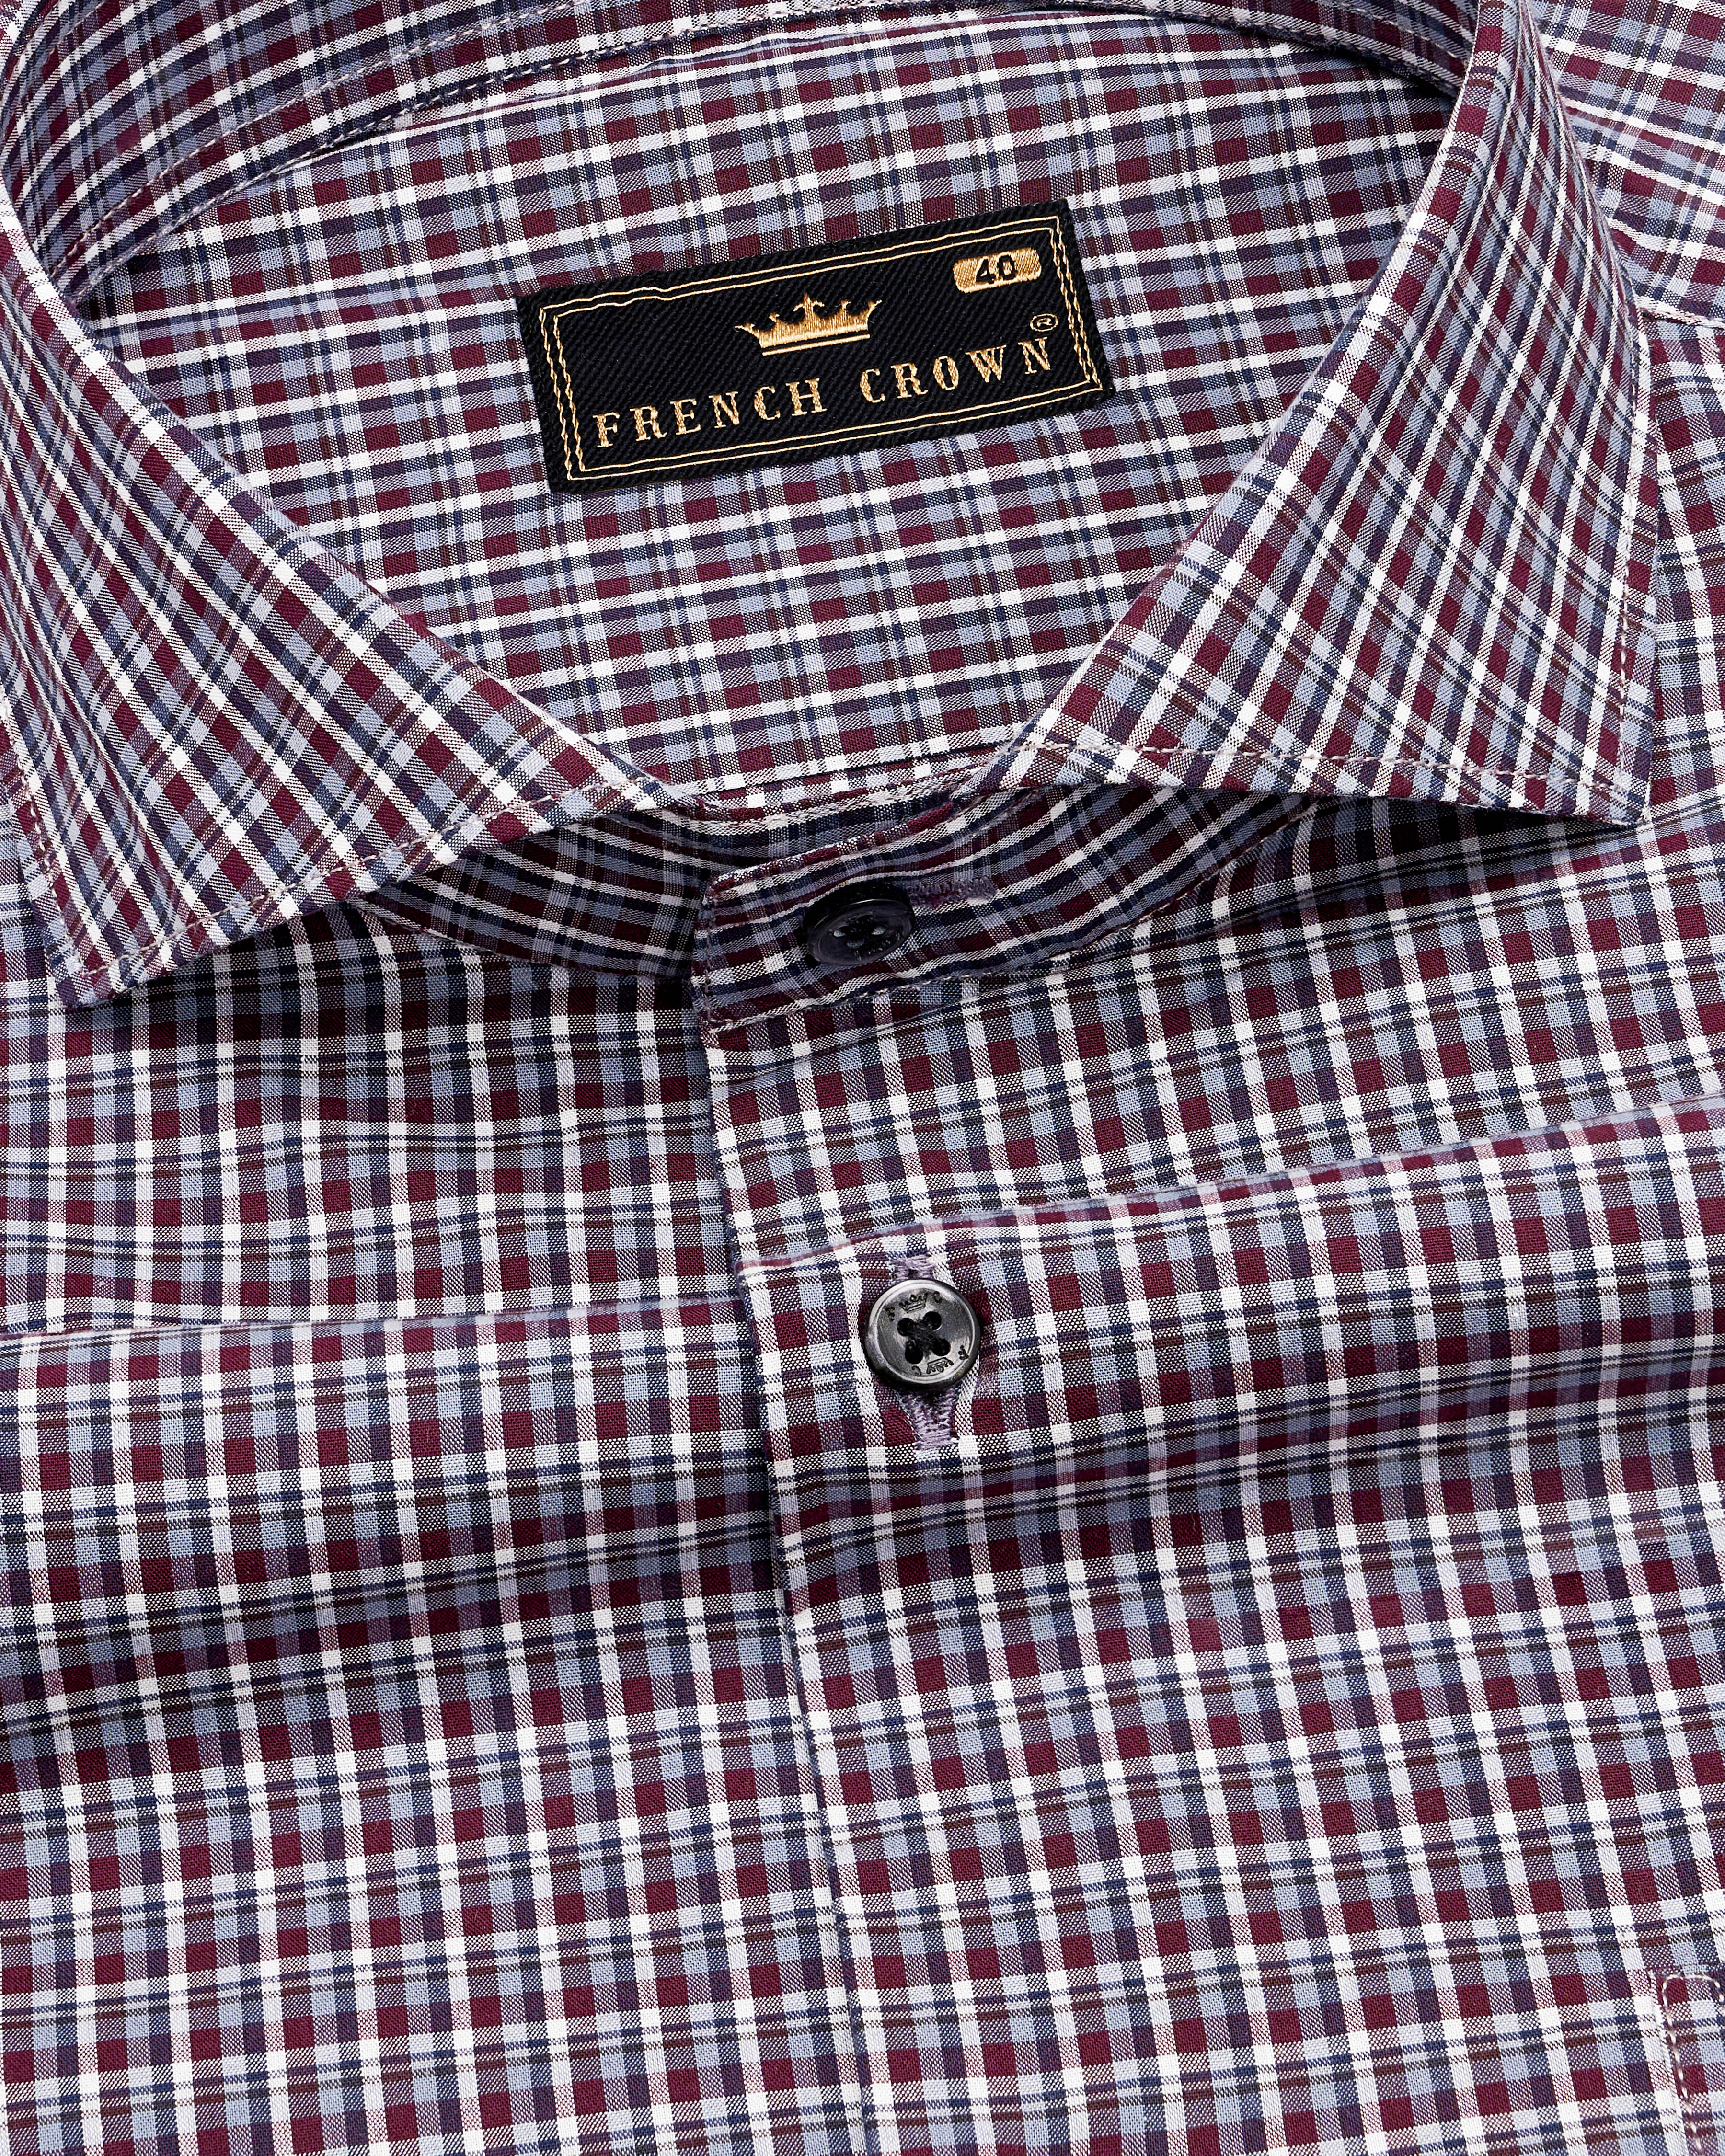 Scarlet Maroon with Gray Checkered Premium Cotton Shirt 9355-CA-BLK-38, 9355-CA-BLK-H-38, 9355-CA-BLK-39, 9355-CA-BLK-H-39, 9355-CA-BLK-40, 9355-CA-BLK-H-40, 9355-CA-BLK-42, 9355-CA-BLK-H-42, 9355-CA-BLK-44, 9355-CA-BLK-H-44, 9355-CA-BLK-46, 9355-CA-BLK-H-46, 9355-CA-BLK-48, 9355-CA-BLK-H-48, 9355-CA-BLK-50, 9355-CA-BLK-H-50, 9355-CA-BLK-52, 9355-CA-BLK-H-52